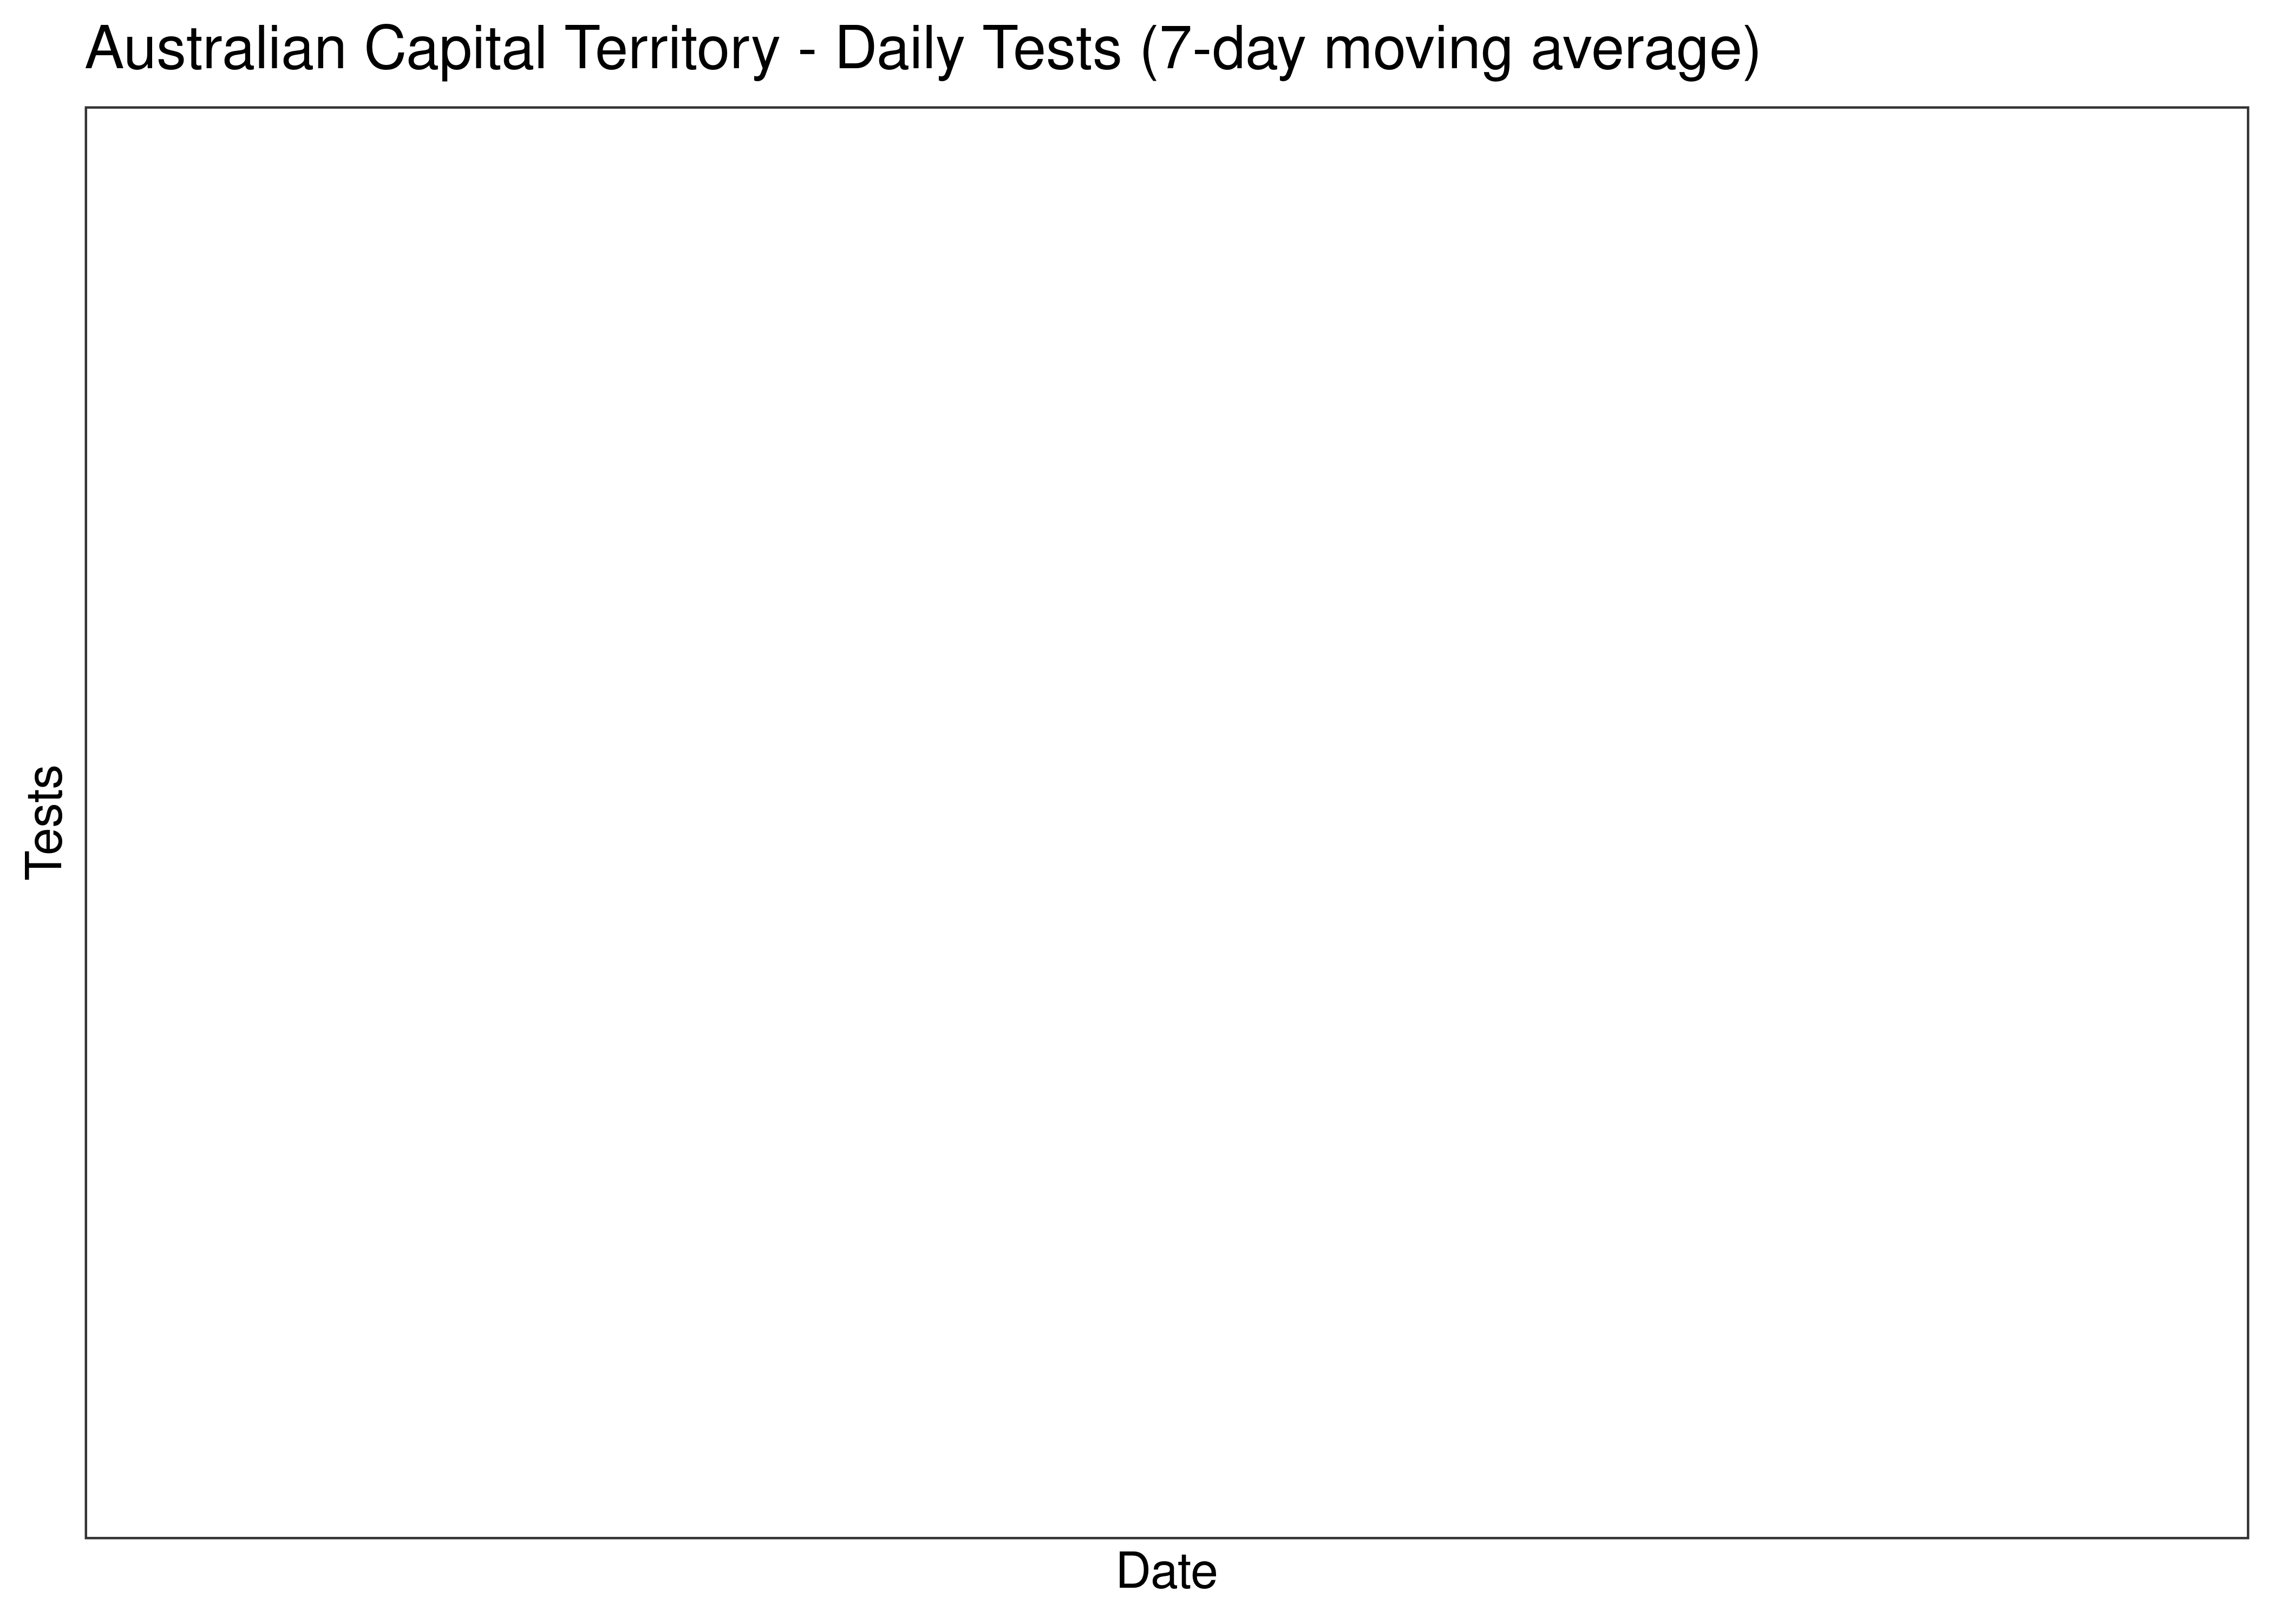 Australian Capital Territory - Daily Tests for Last 30 Days (7-day moving average)